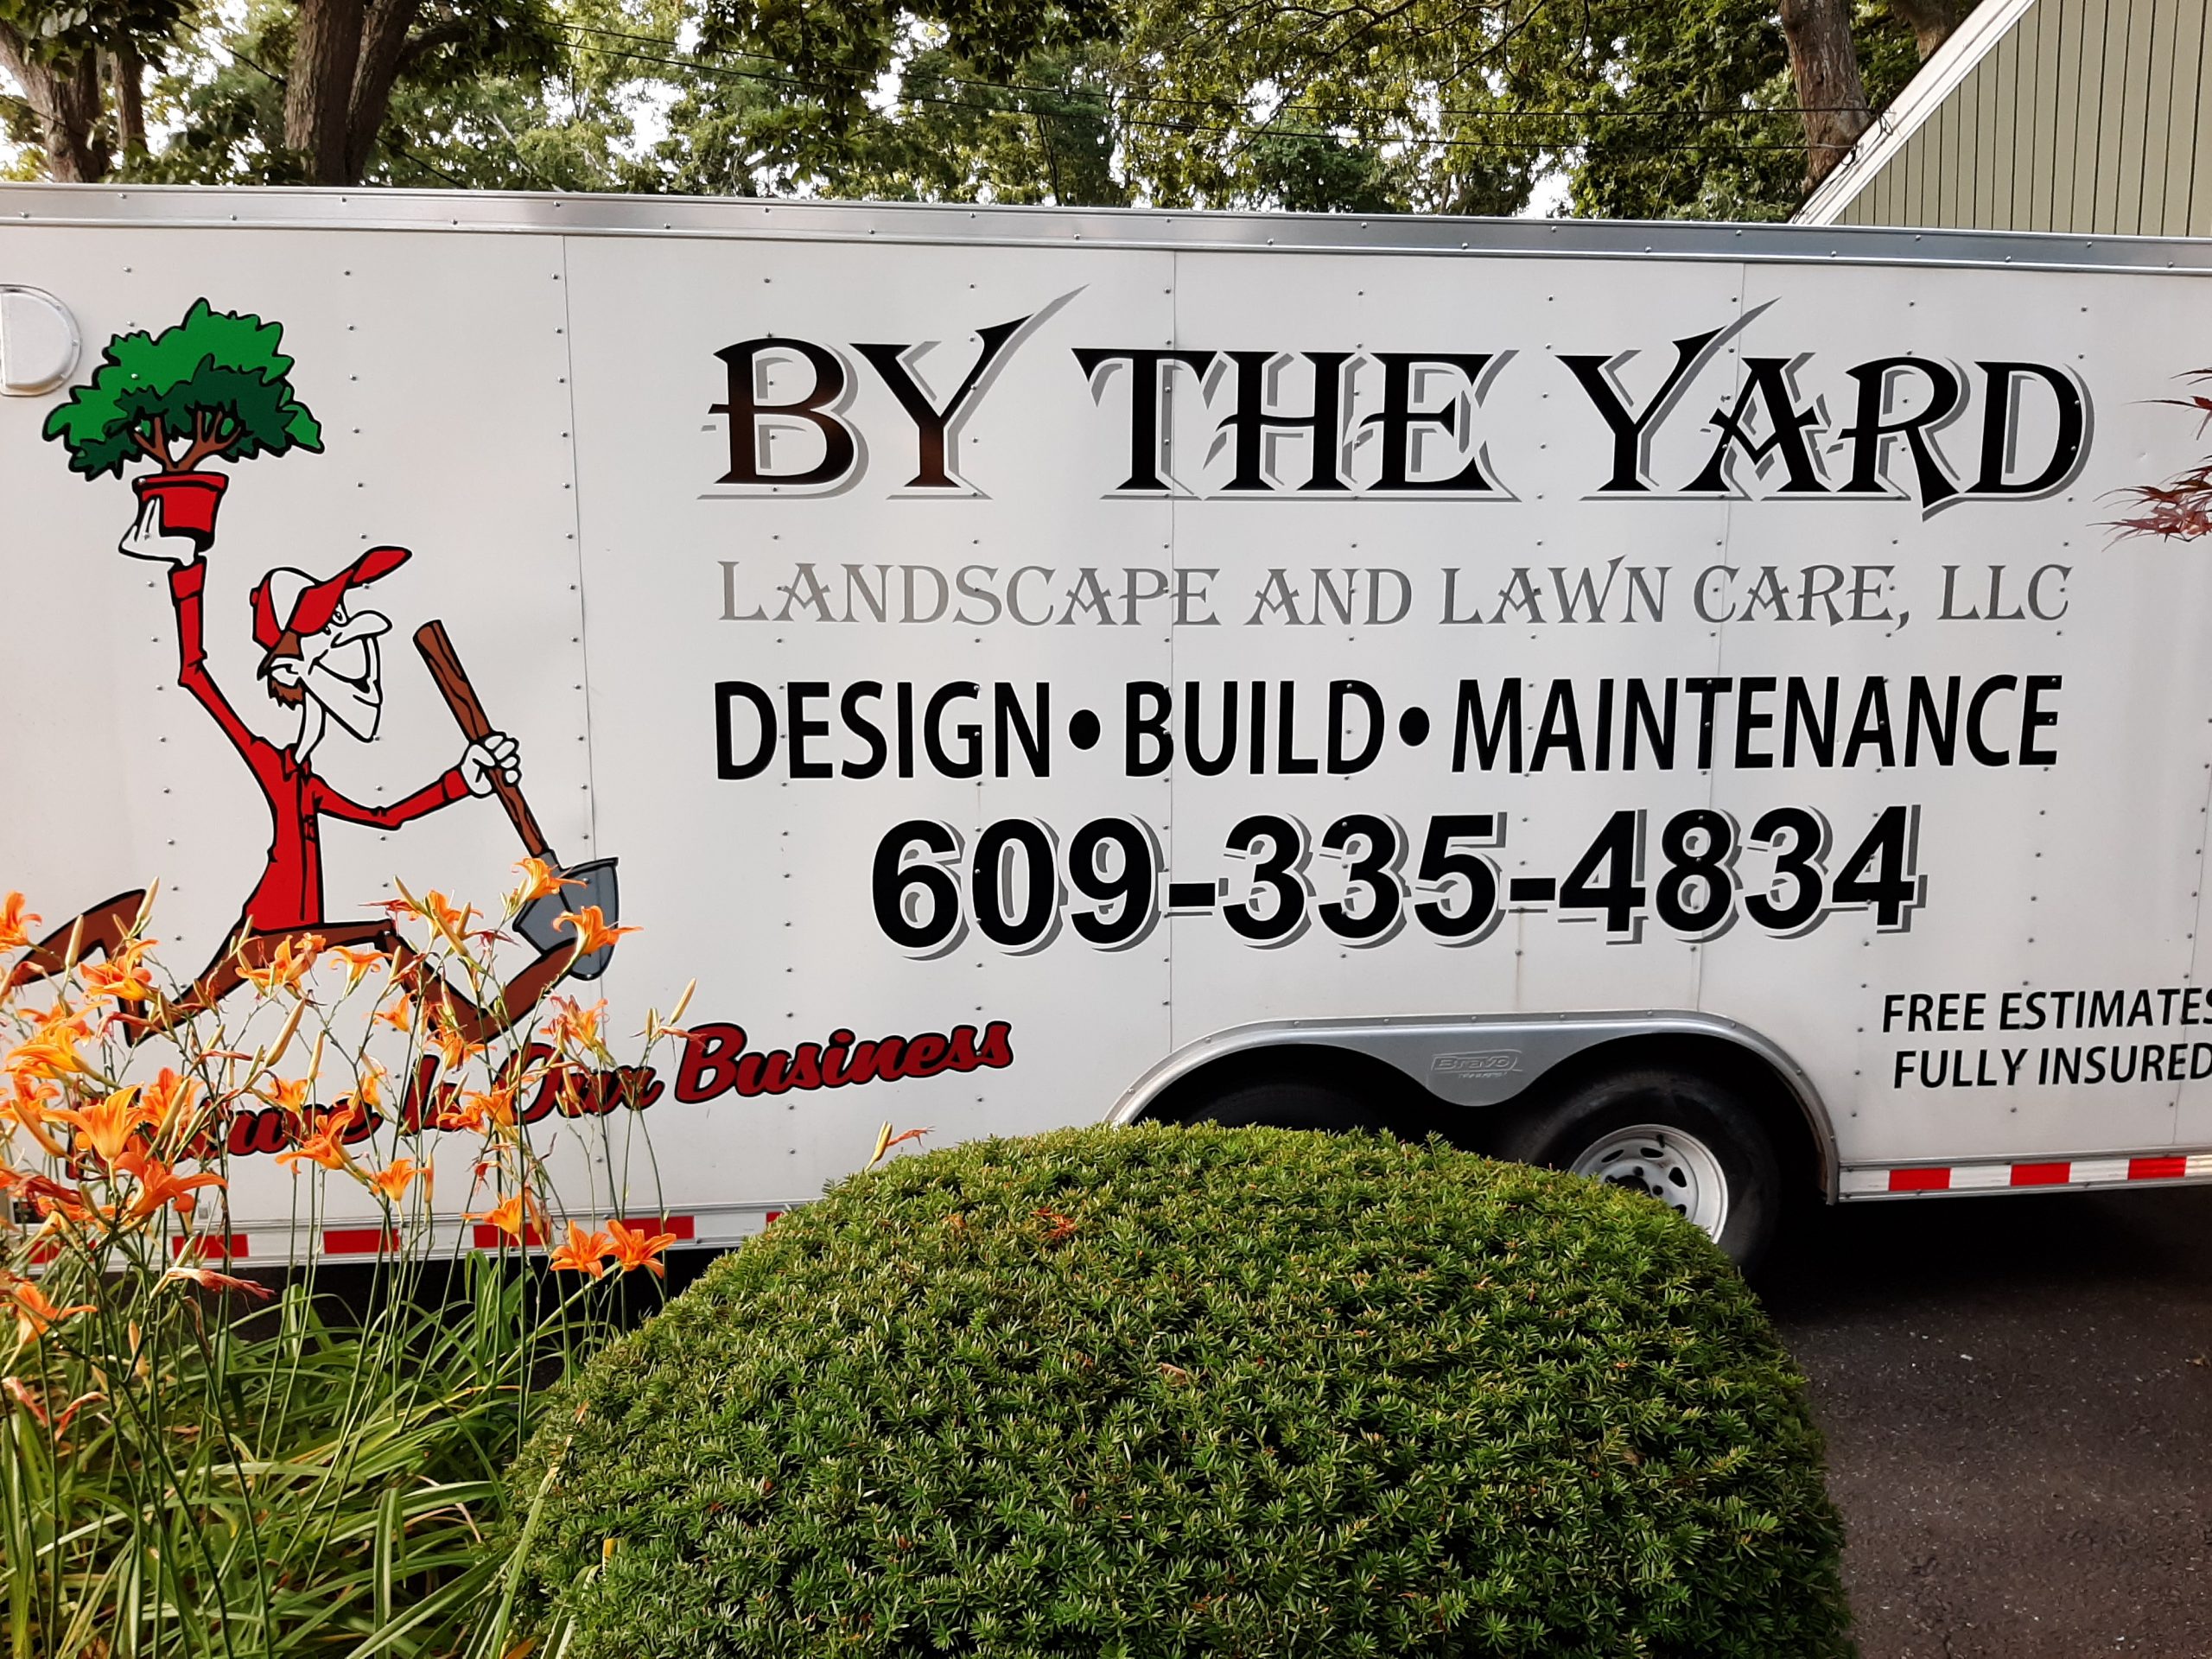 By The Yard Landscaping Services Little Egg Harbor Township New Jer